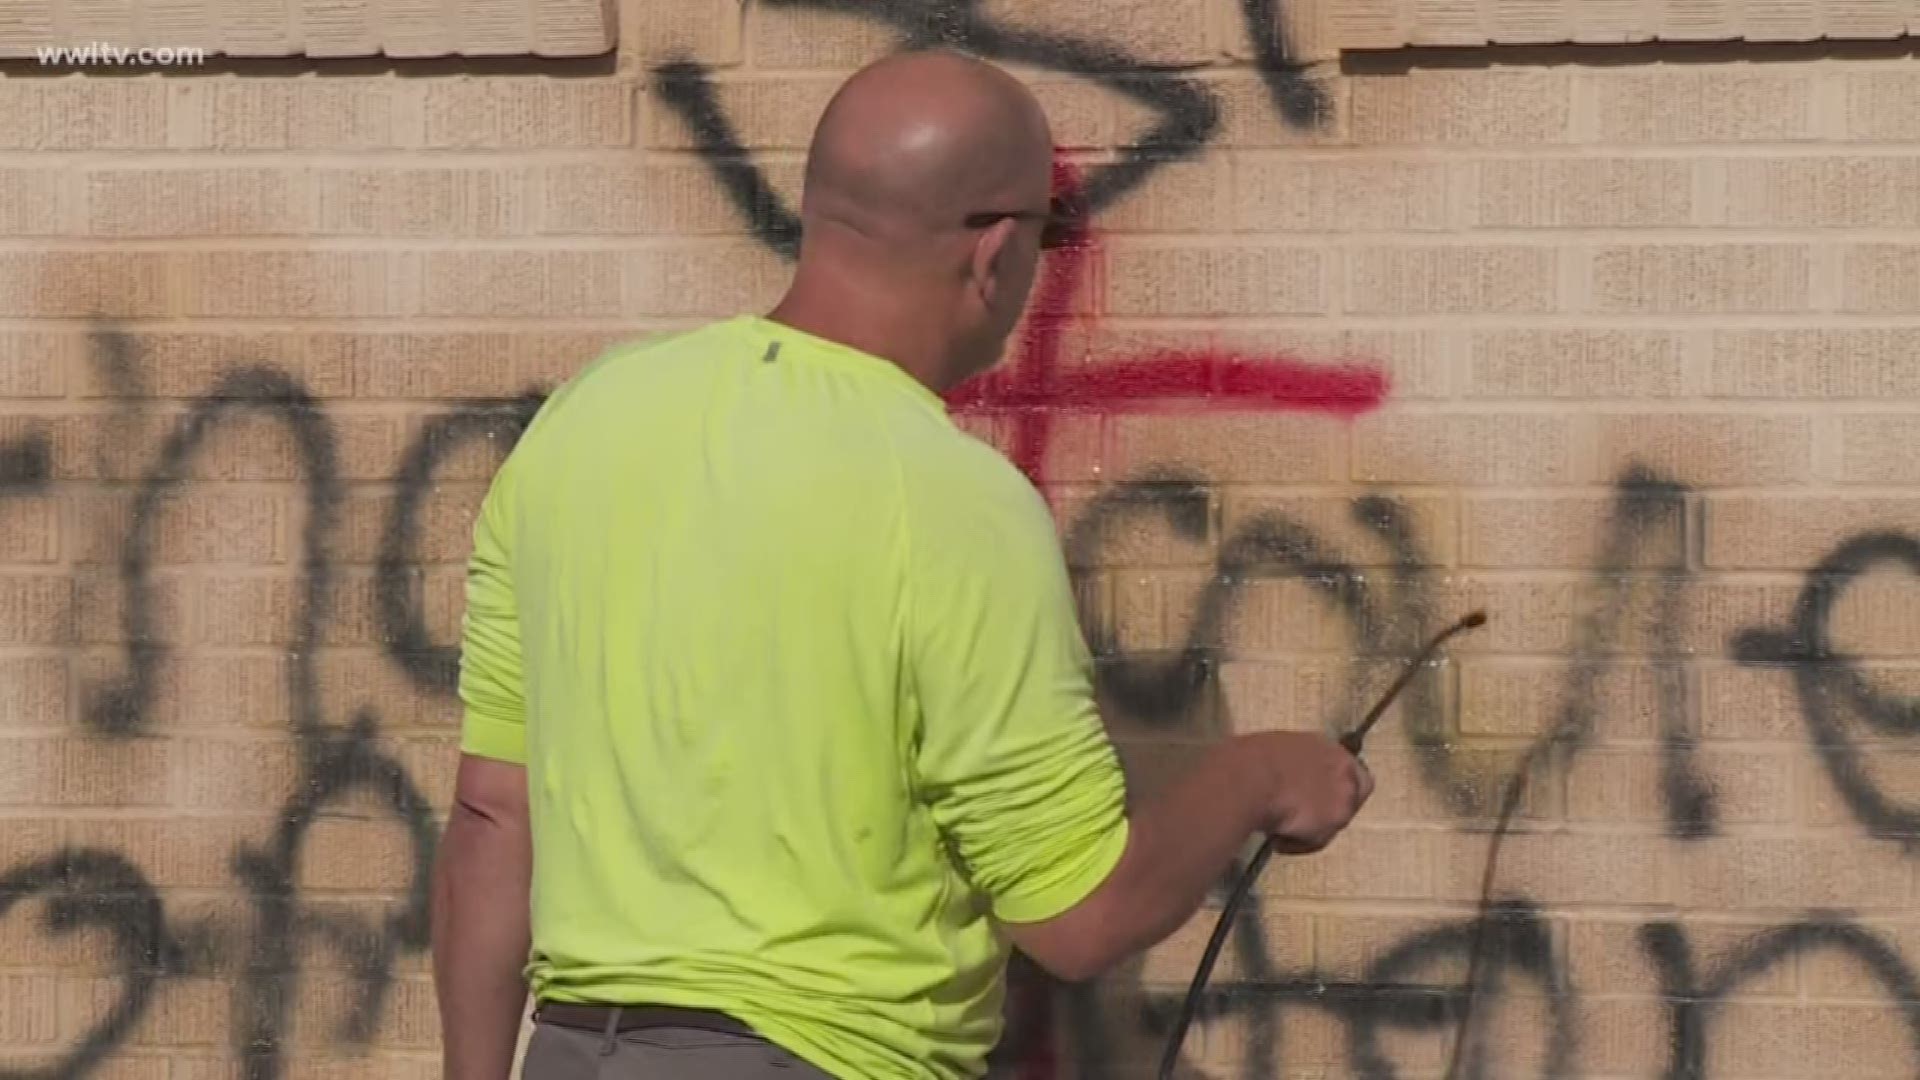 Man steps up, cleans Anti-Semitic graffiti from Mandeville synagogue